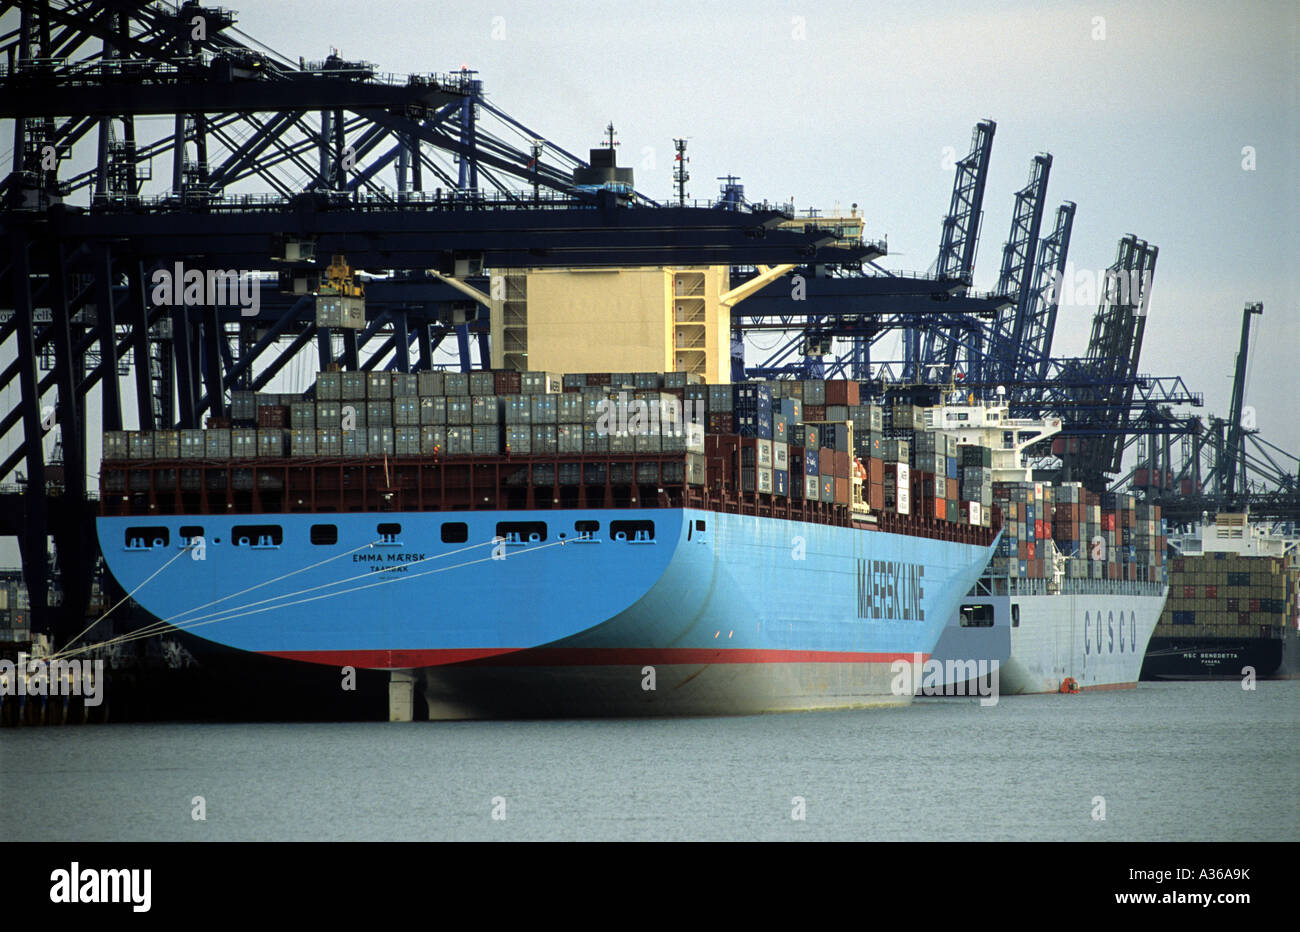 Emma Maersk, one of the world's largest container ship docked at Trinity Quay, port of Felixstowe in Suffolk, UK. Stock Photo